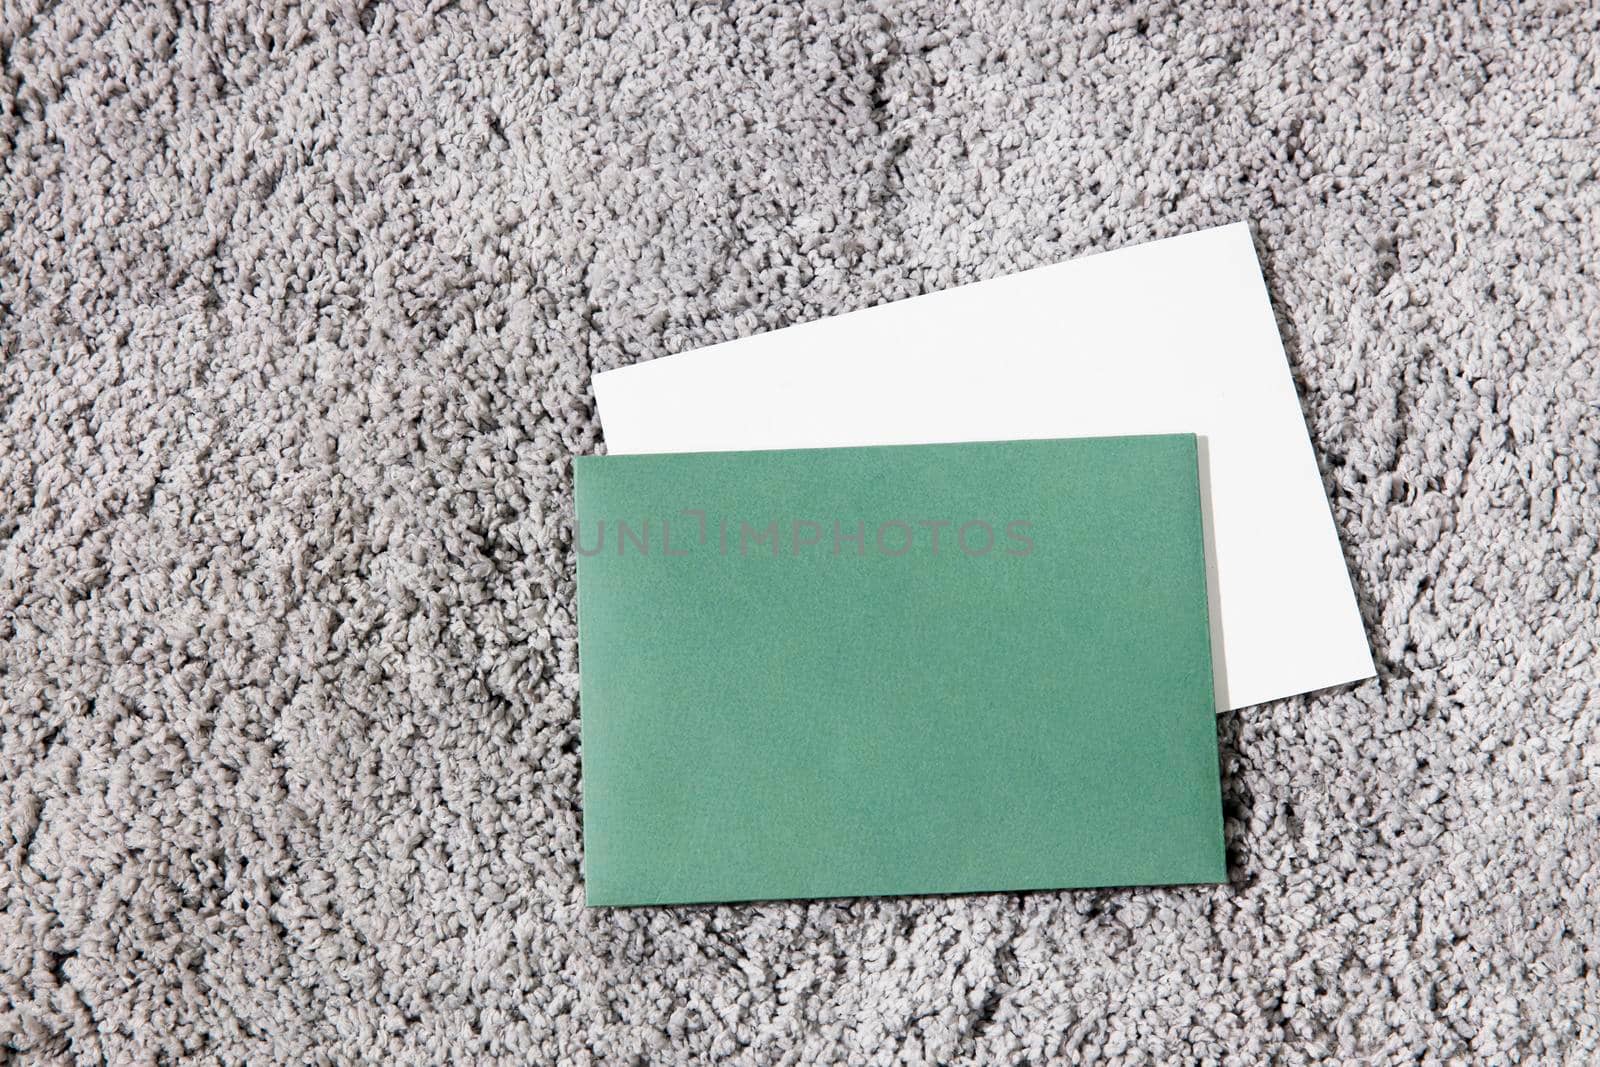 Green and white envelopes are on a gray fluffy surface. Concept for text.